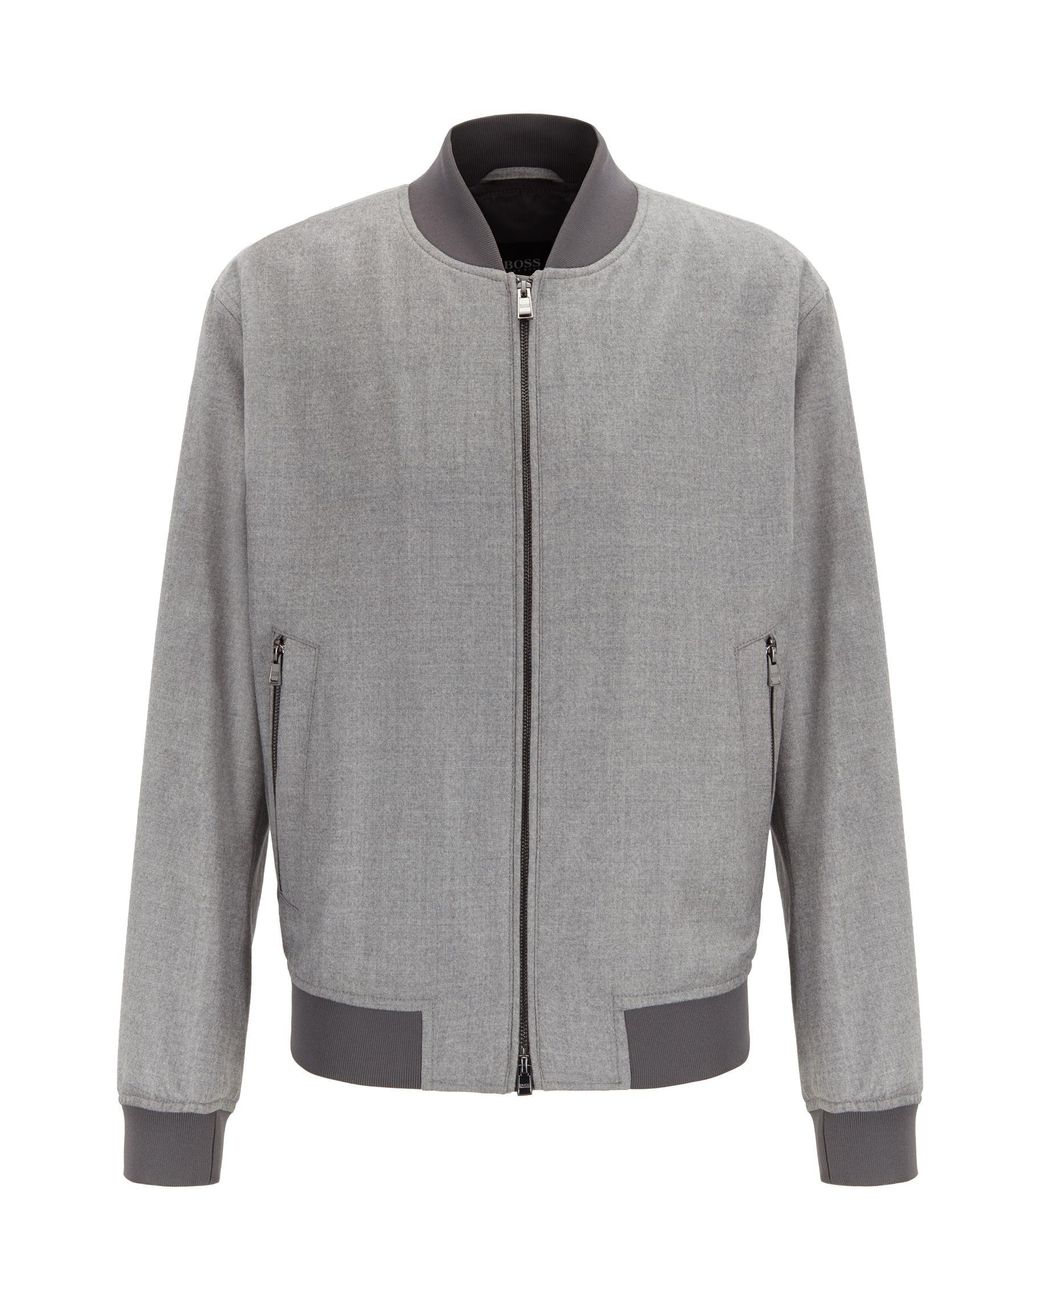 BOSS Grey Wool Bomber Jacket in Gray for Men - Save 61% - Lyst